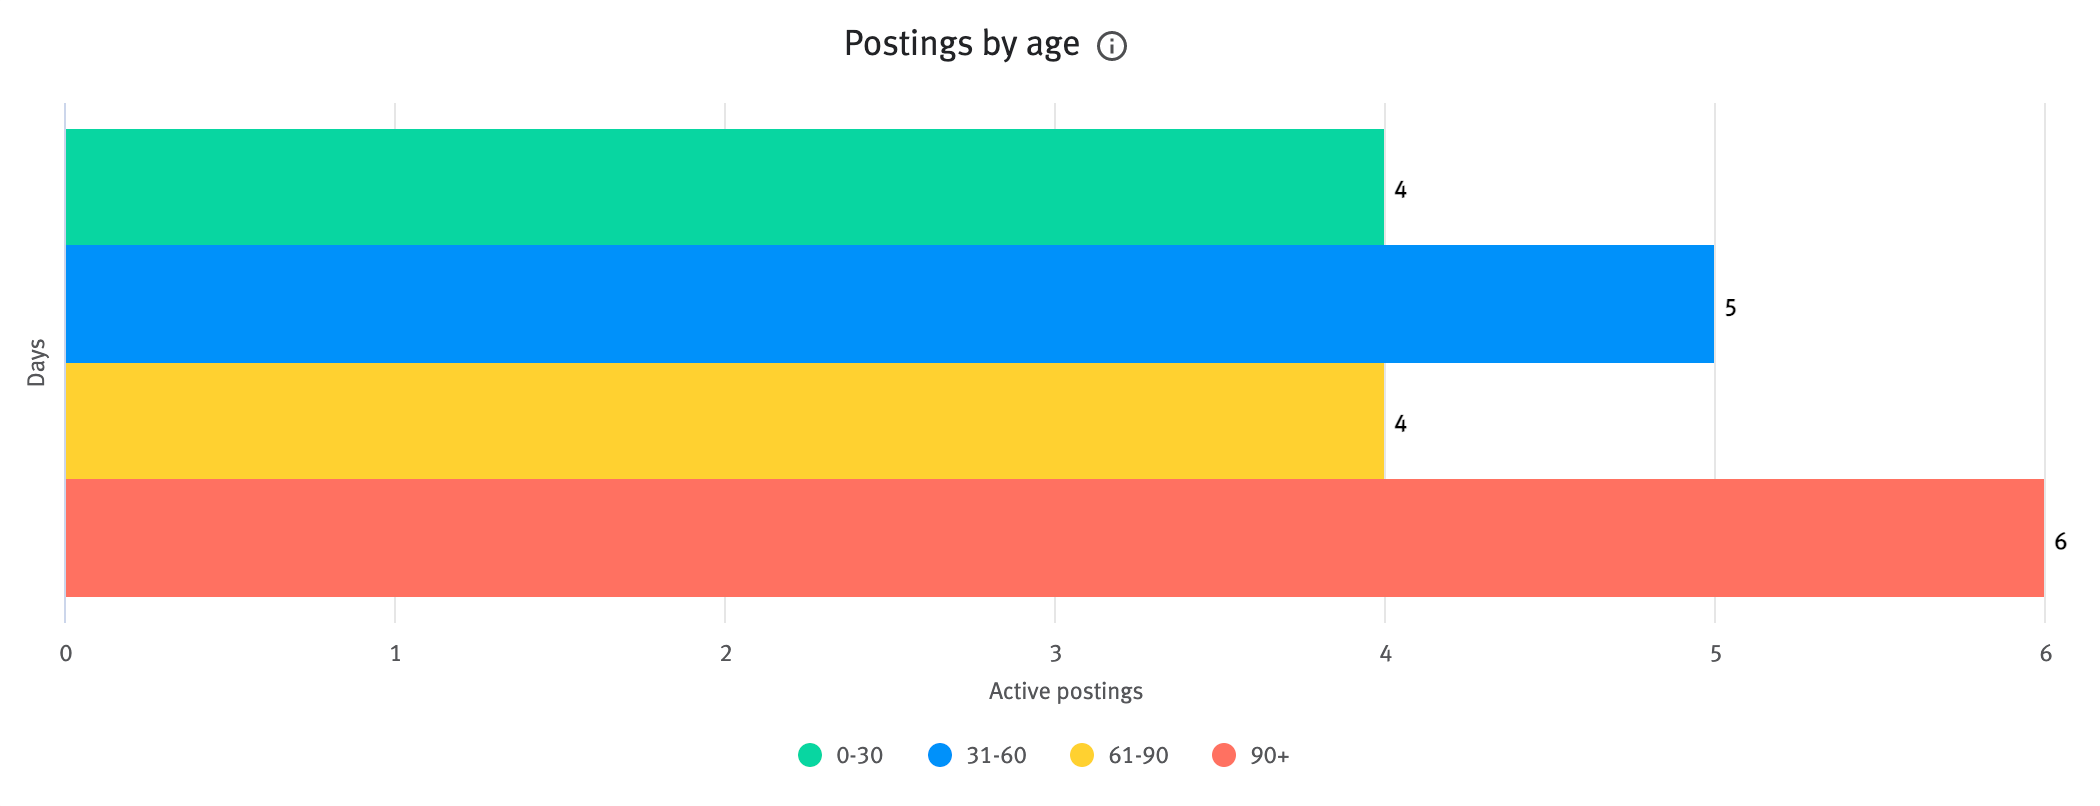 Postings by age chart